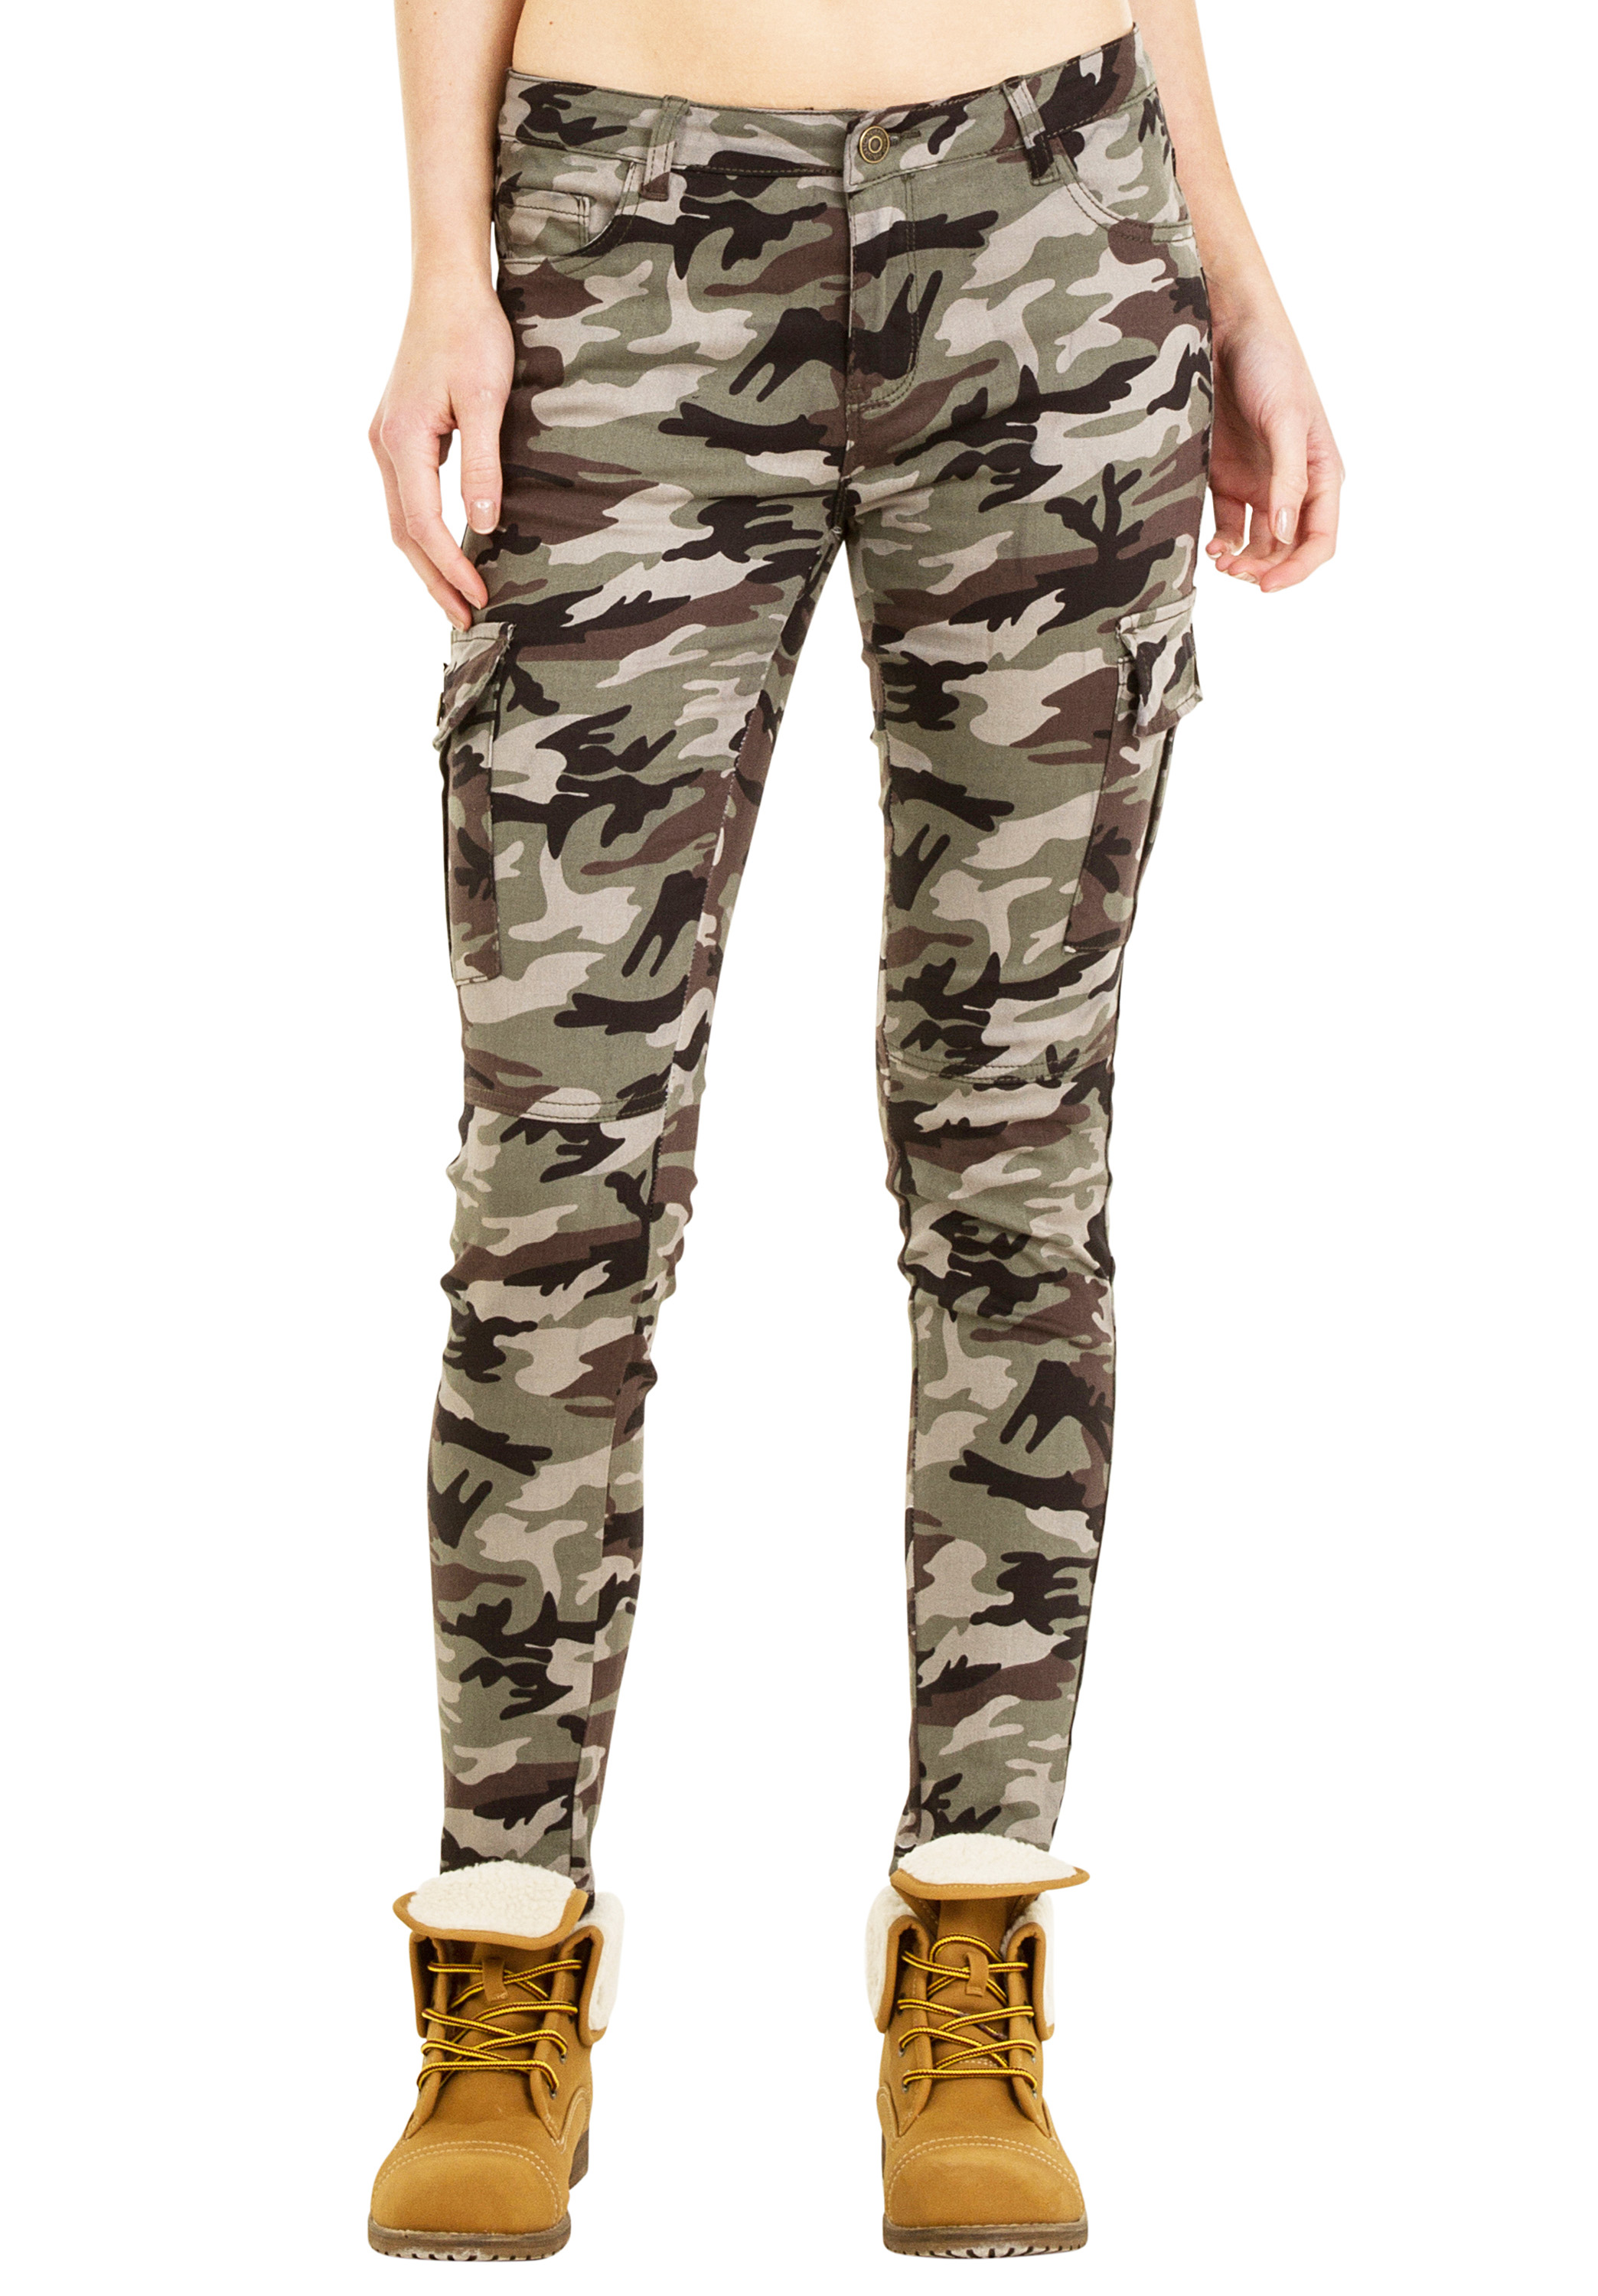 New Womens Ladies Slim Skinny Stretchy Camouflage Combat Trousers Cargo ...